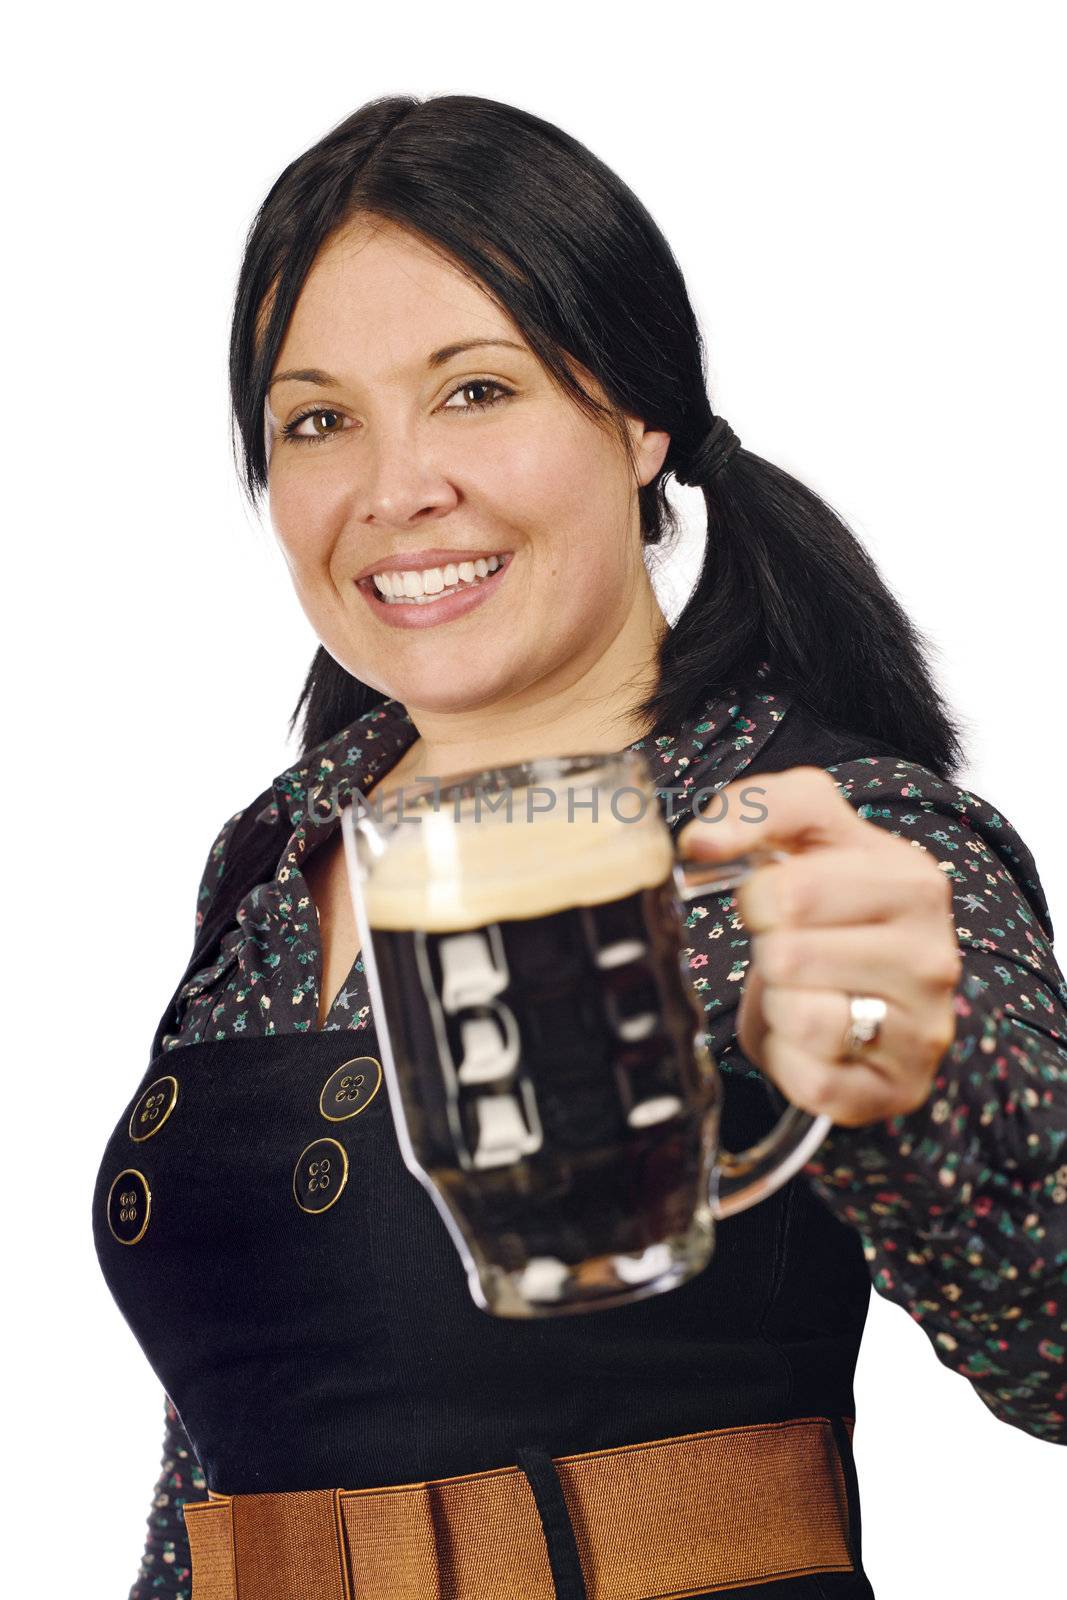 Female serving you a pint of stout.
